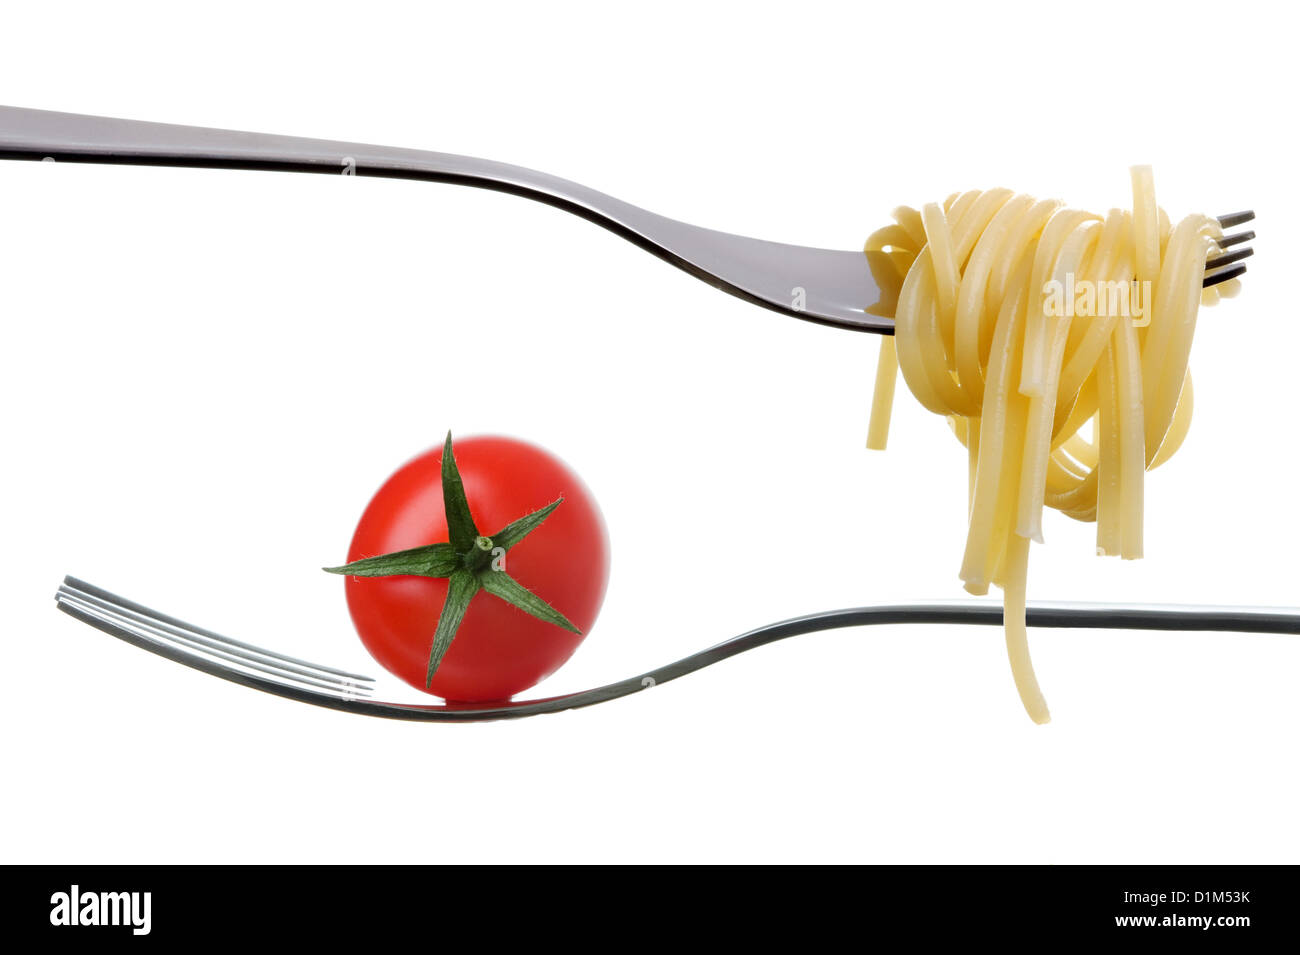 spaghetti pasta and cherry tomato on a fork isolated against white background Stock Photo